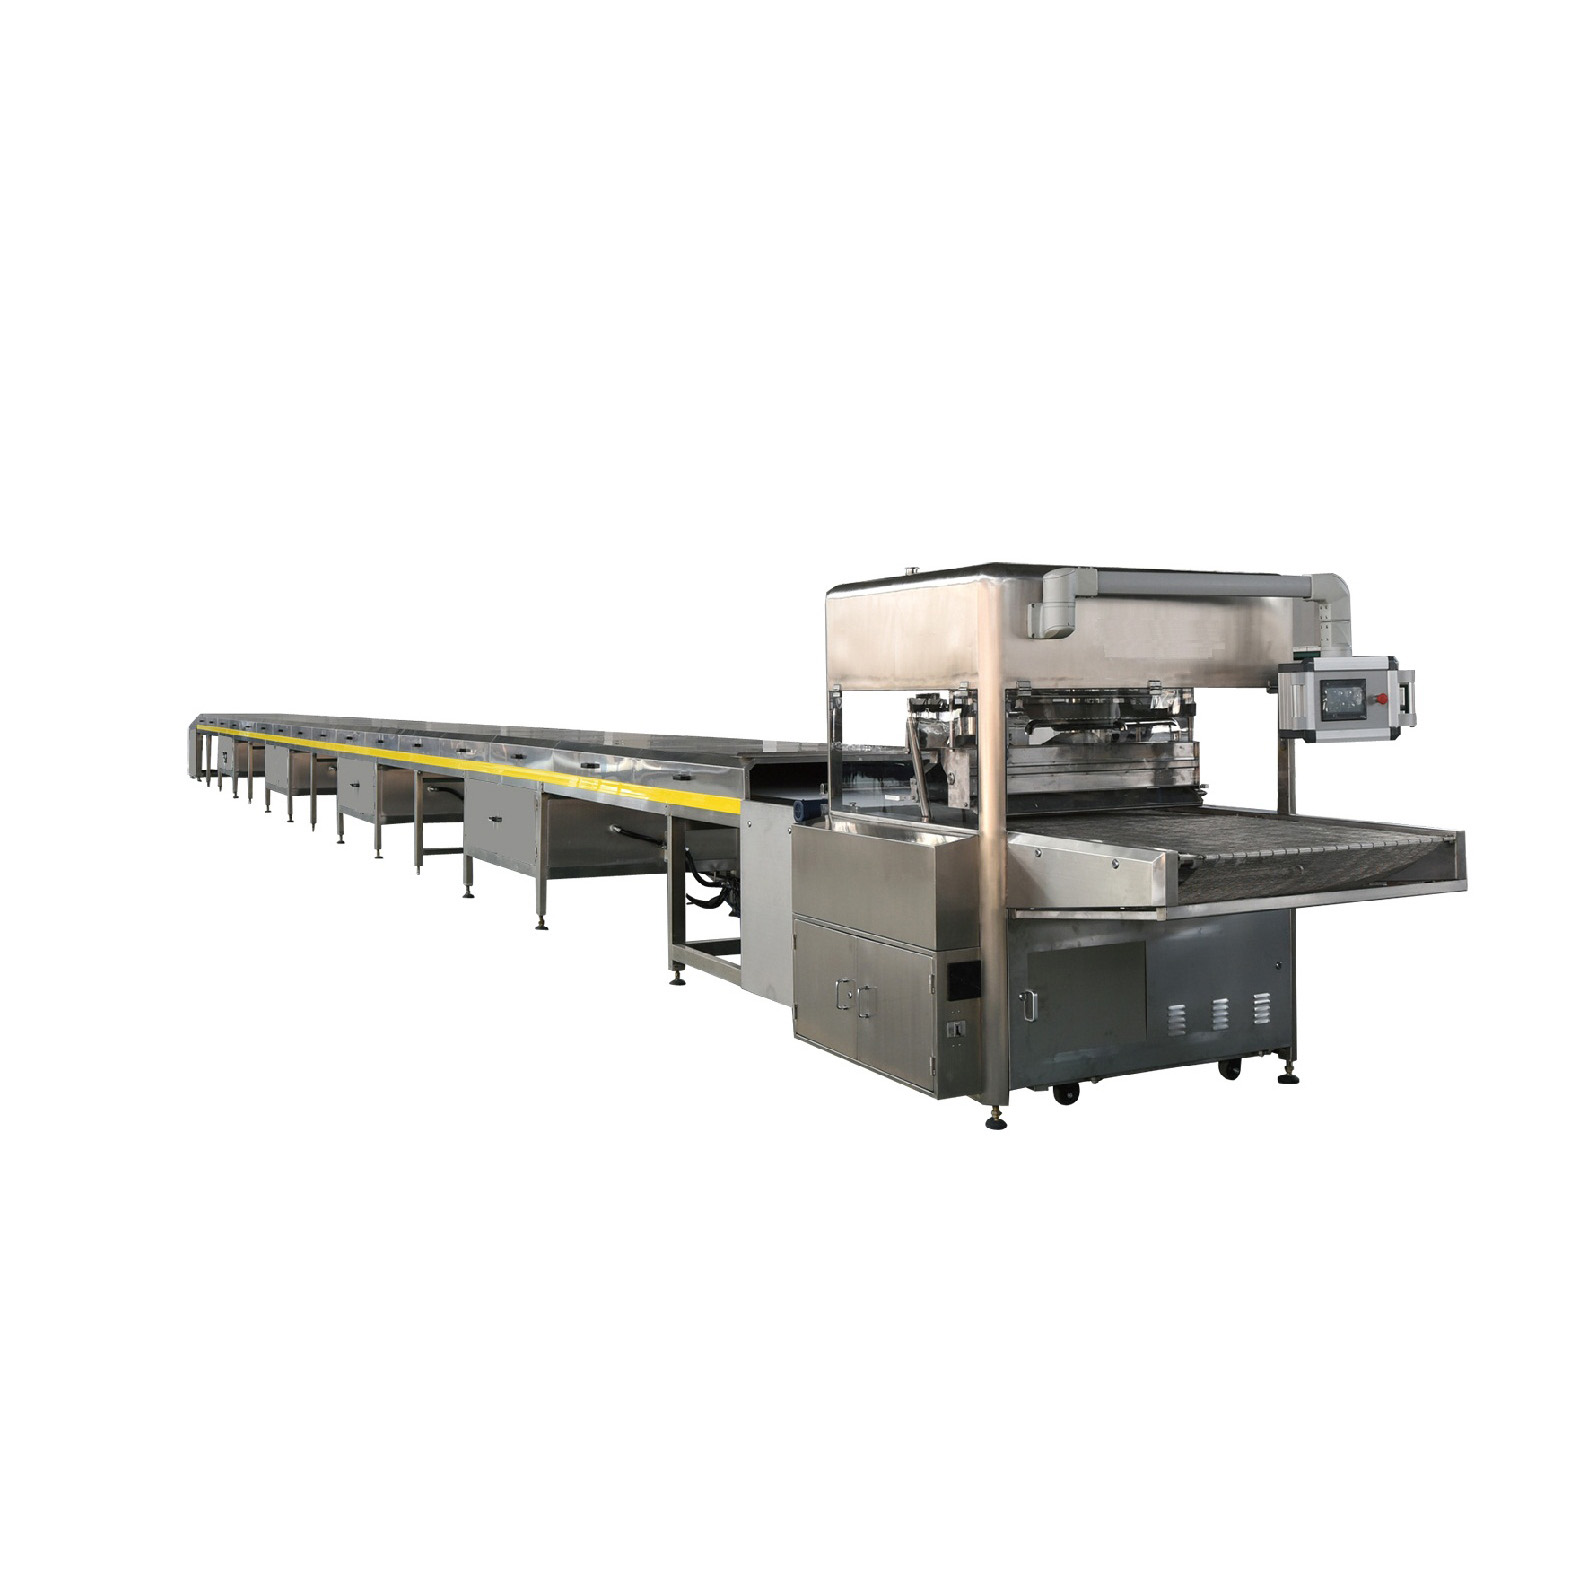 Professional Chocolate Bar Making Machine Chocolate Enrobing Coating Machine With Cooling Tunnel